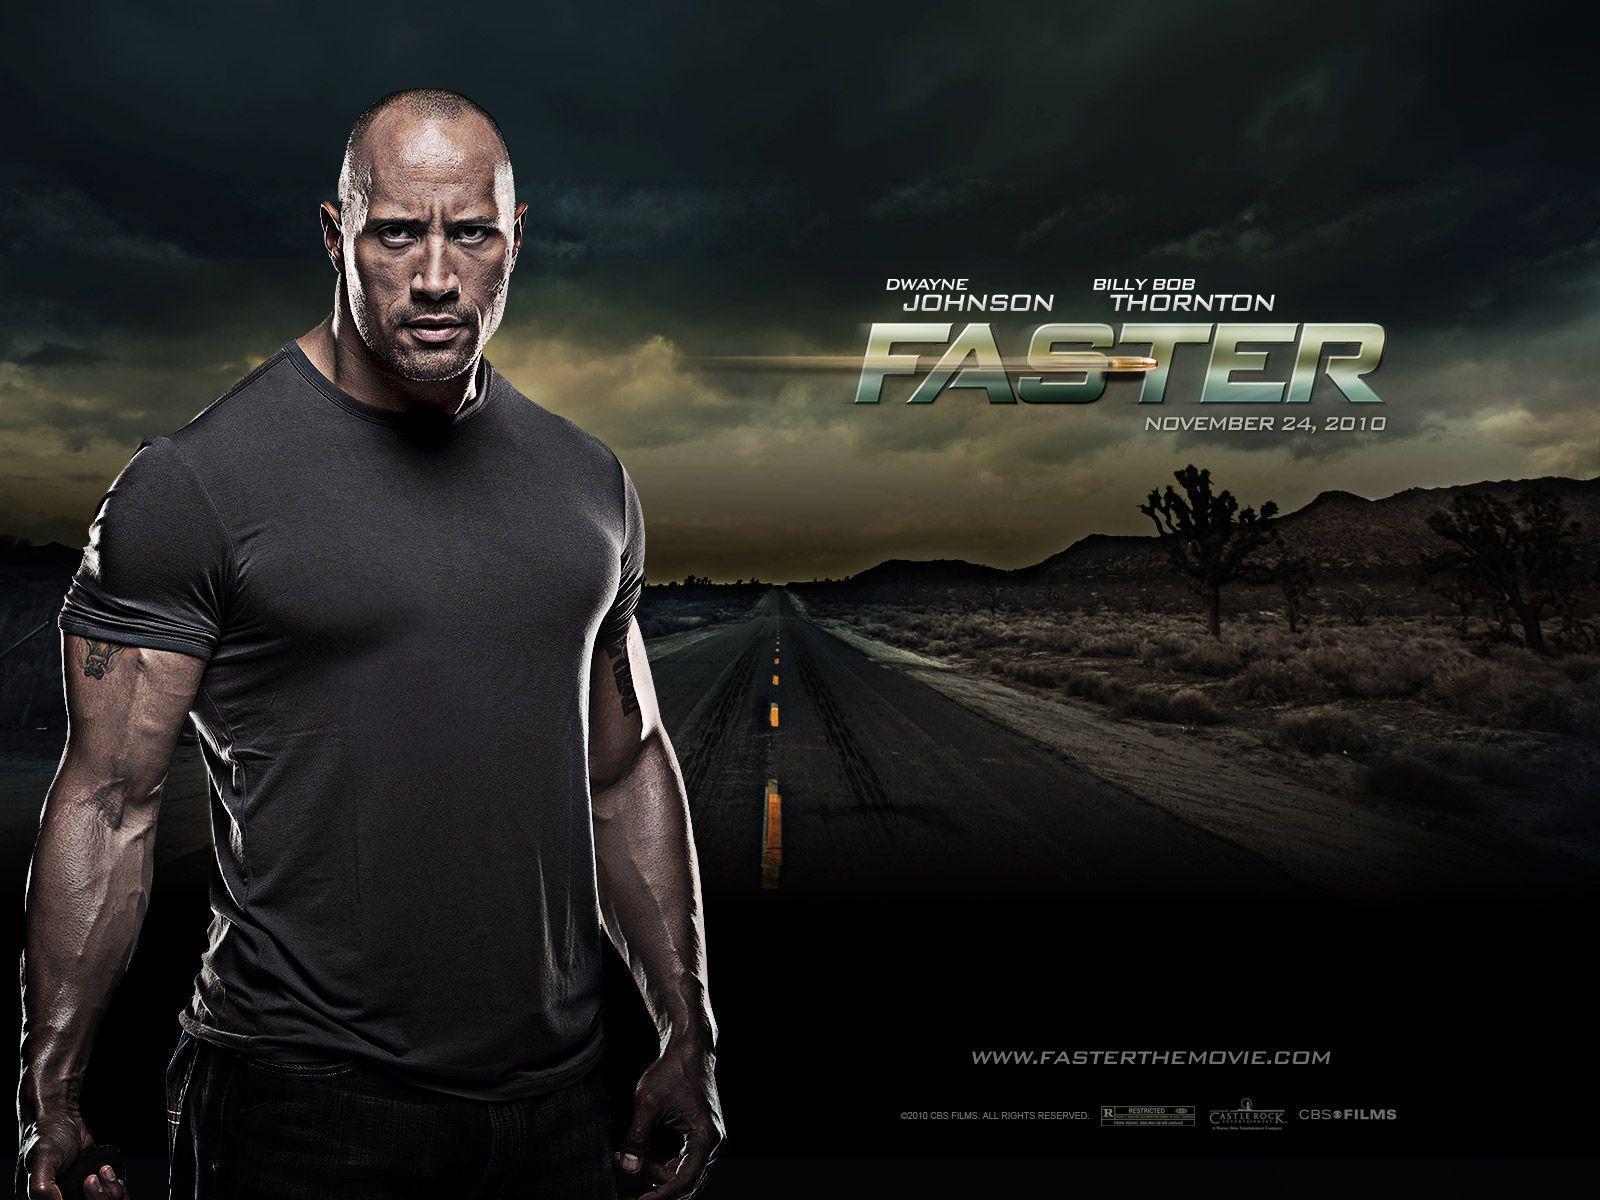 Dwayne Johnson Wallpaper High Resolution and Quality Download